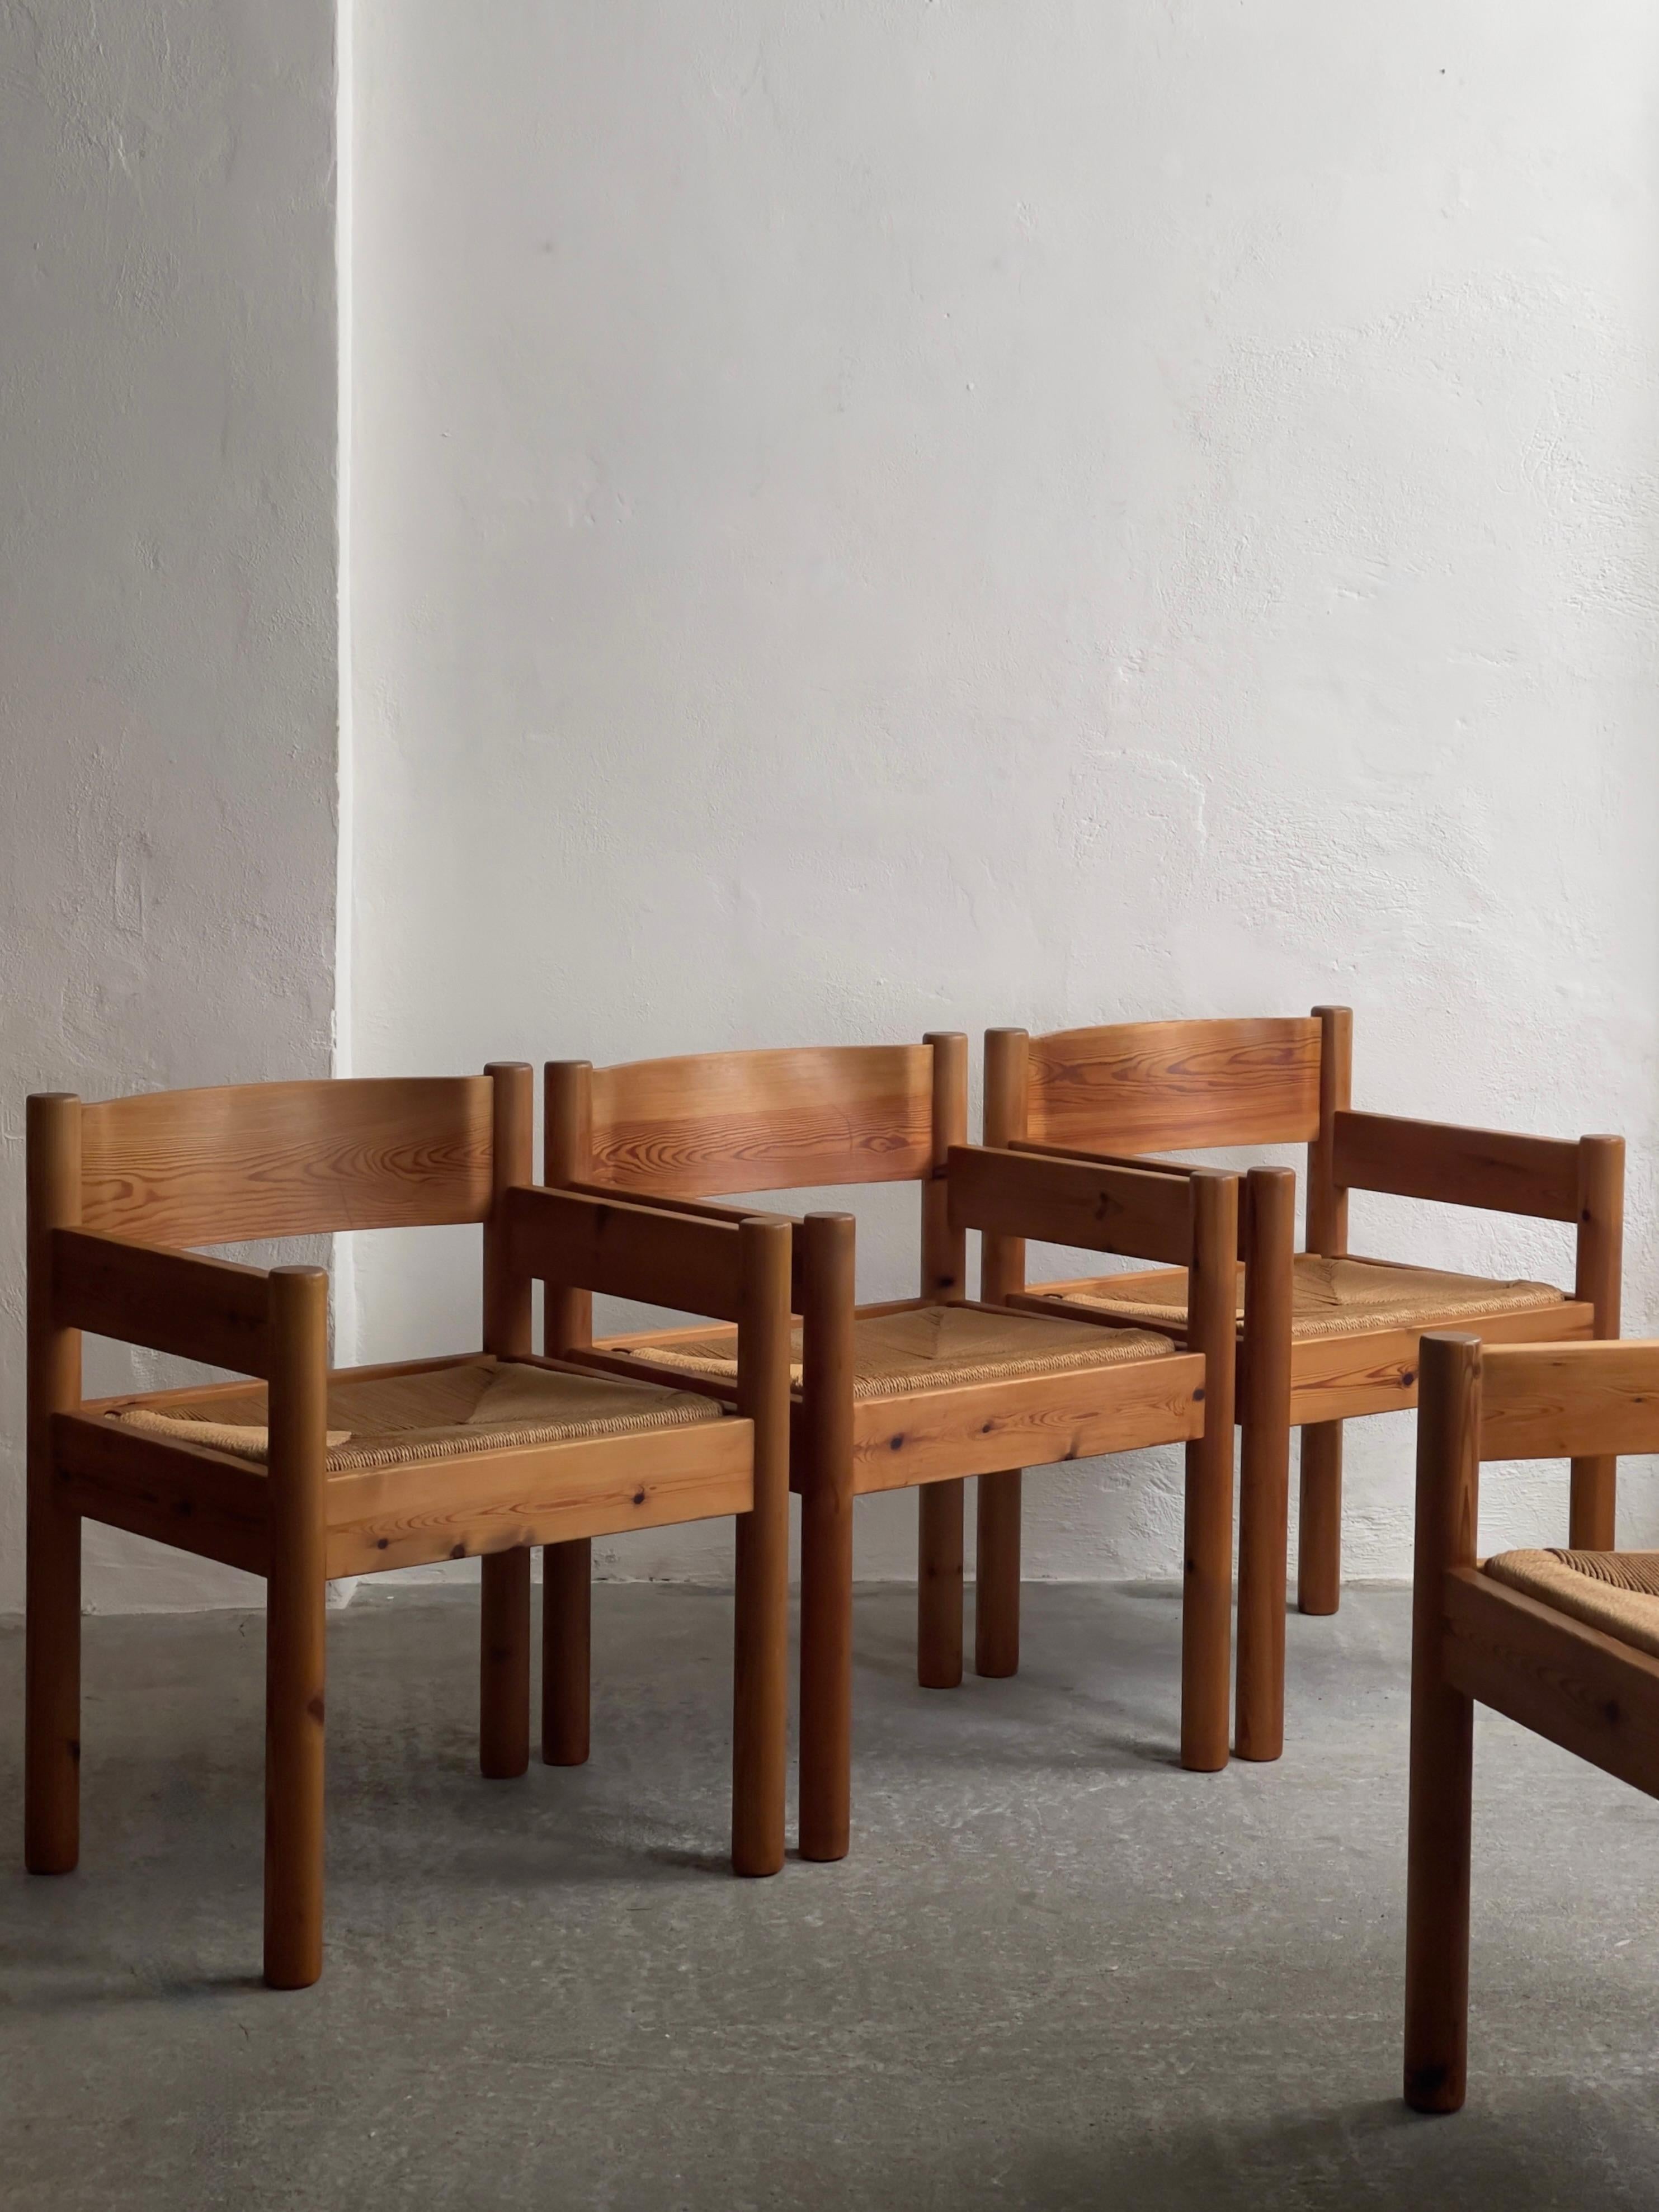 A set of 4 original and very rare 1970s modernist dining chairs in solid pine and paper cord by the danish pioneer architects Friis & Moltke, Denmark.

These chairs are very well crafted by danish cabinet maker -original in solid pine wood and paper